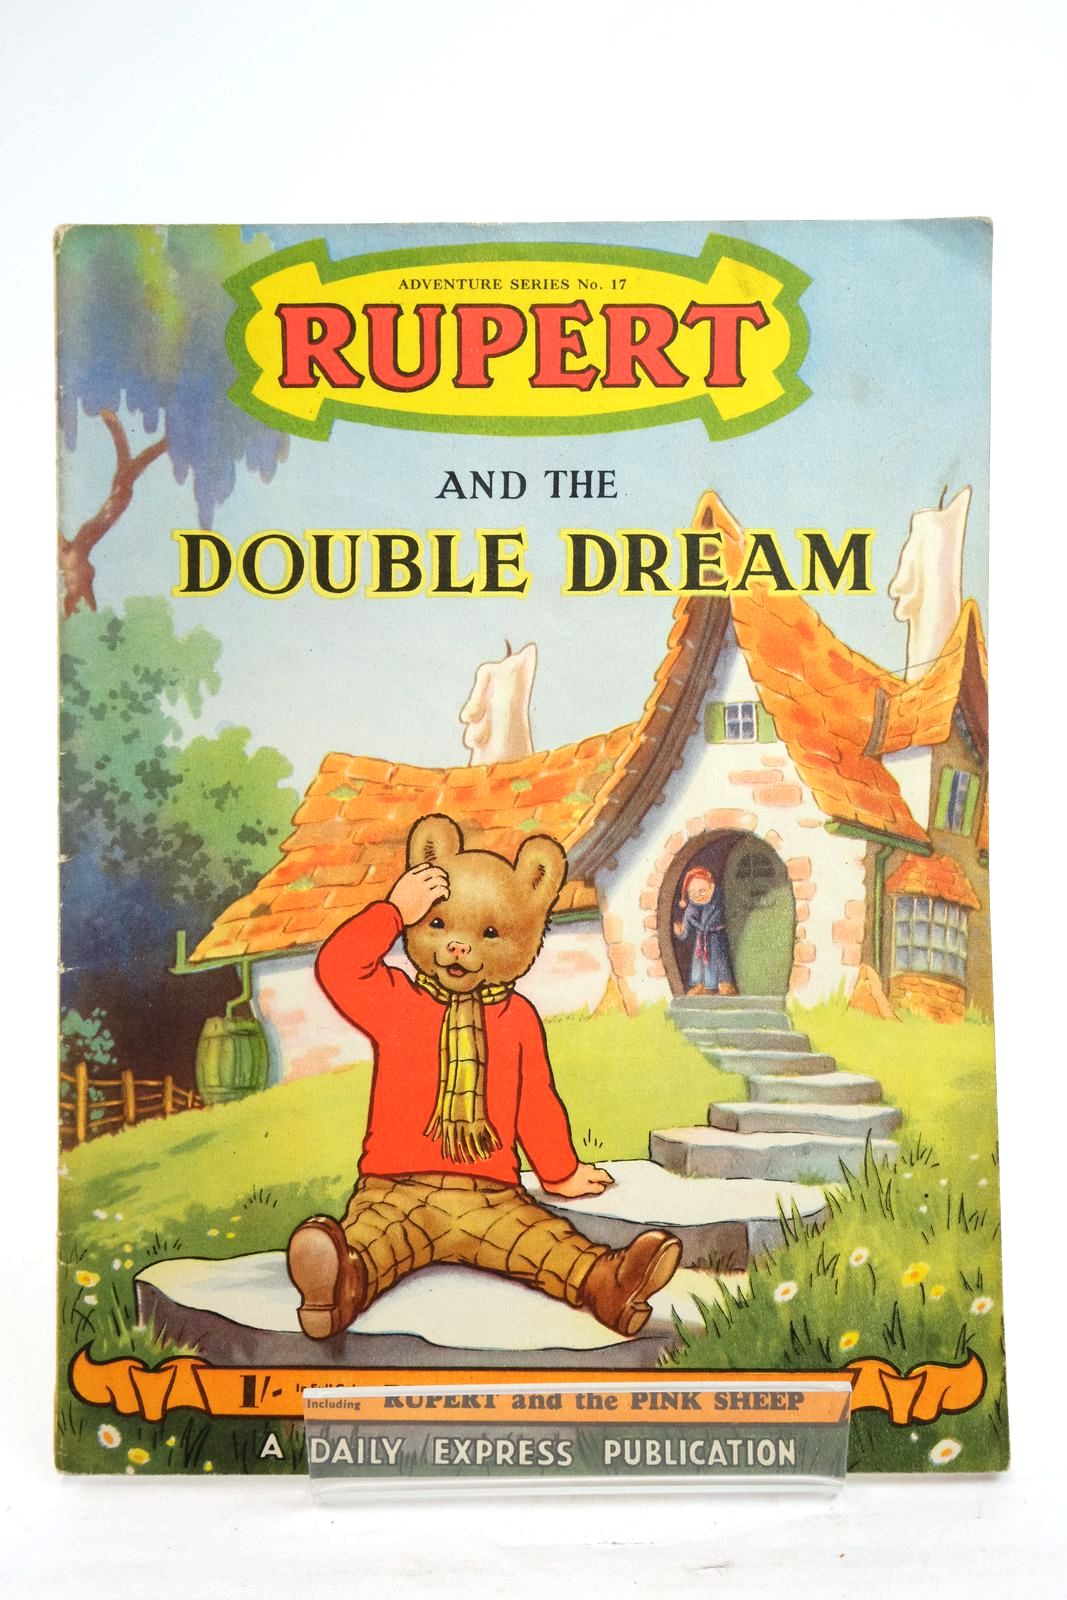 Photo of RUPERT ADVENTURE SERIES No. 17 - RUPERT AND THE DOUBLE DREAM- Stock Number: 2136974